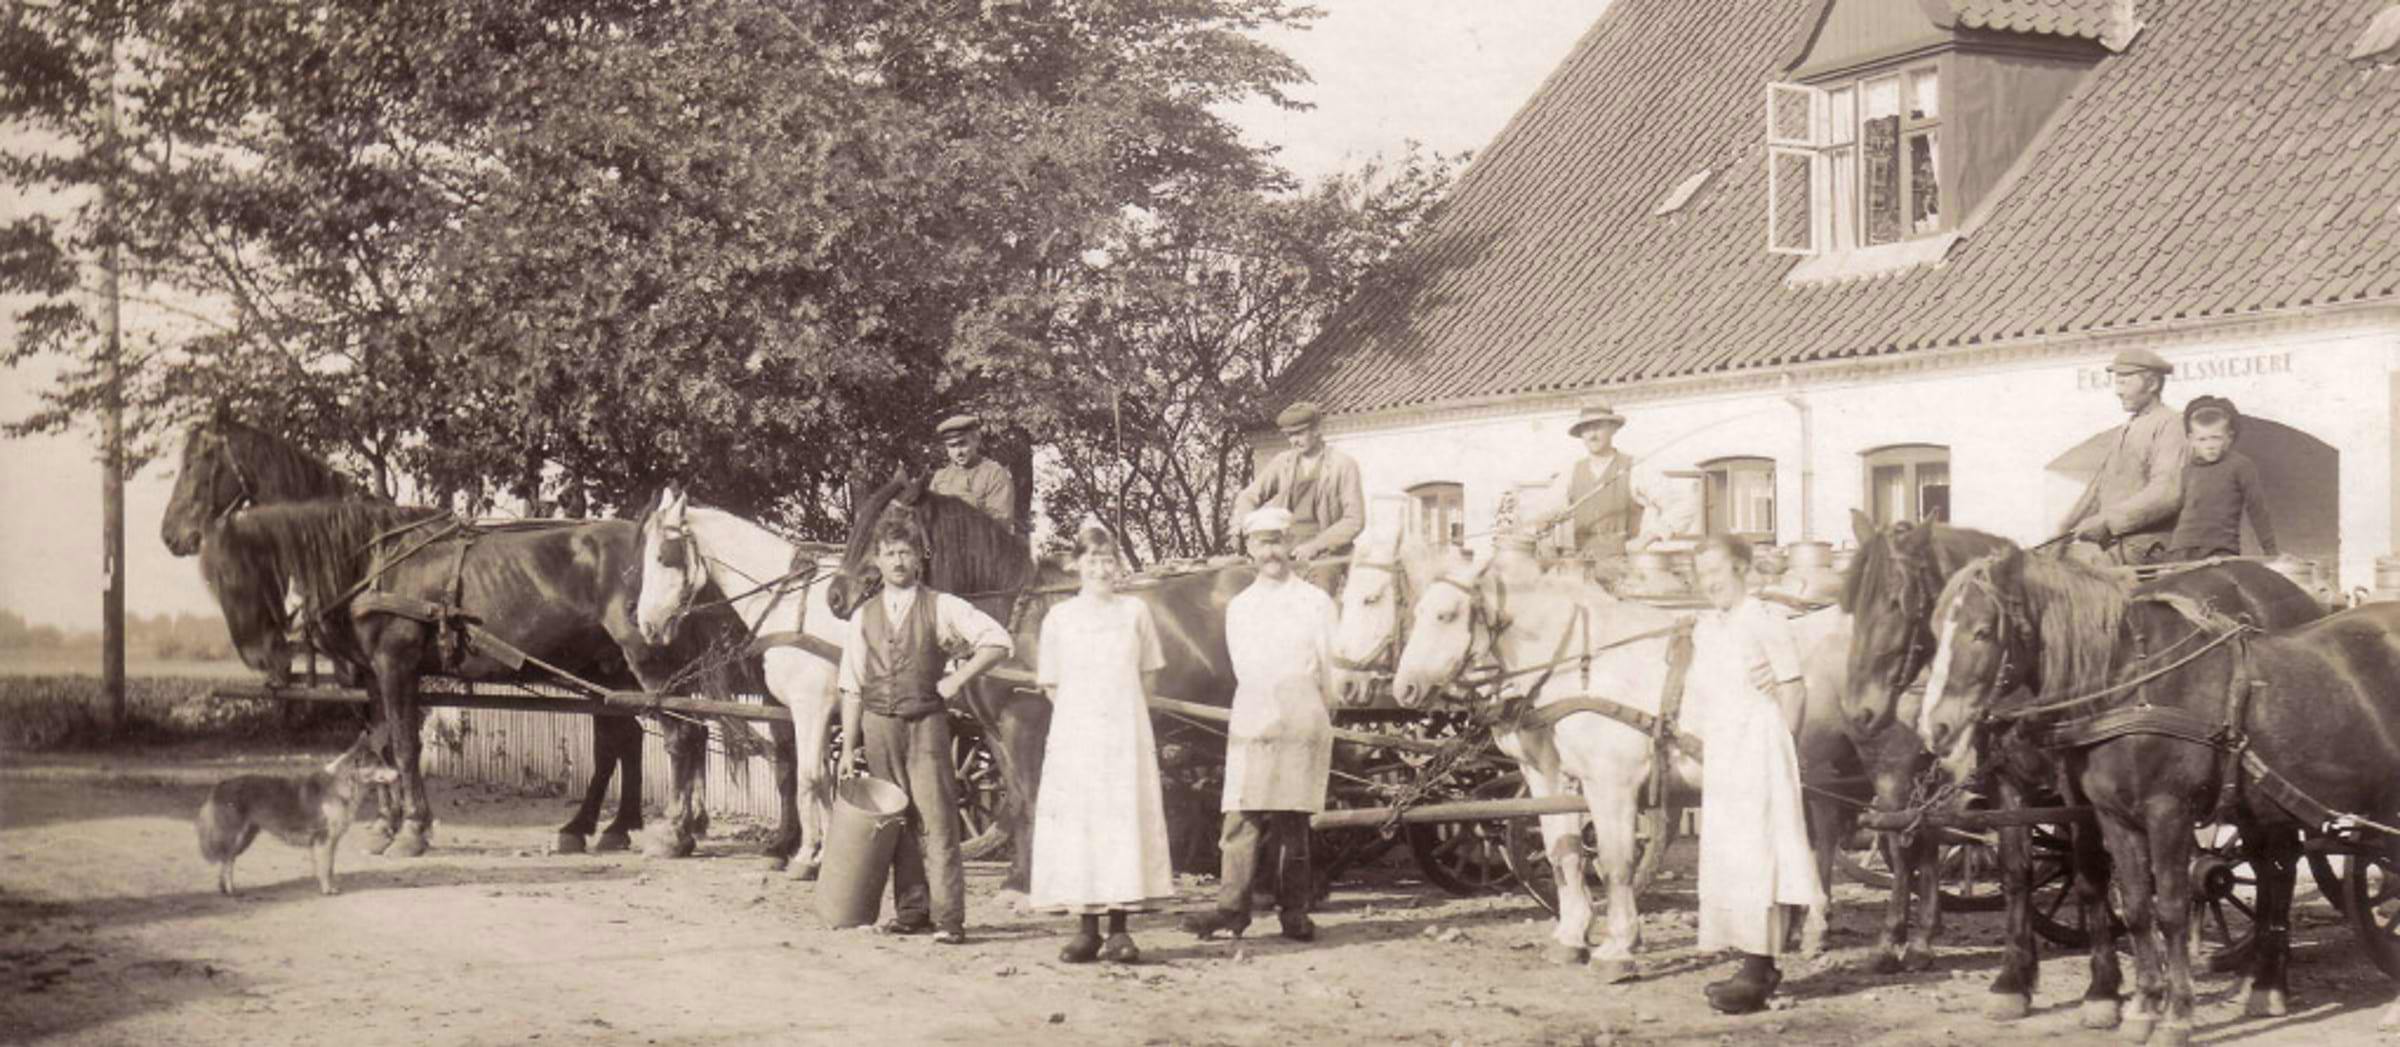 An old black and white photo of farmers on horses